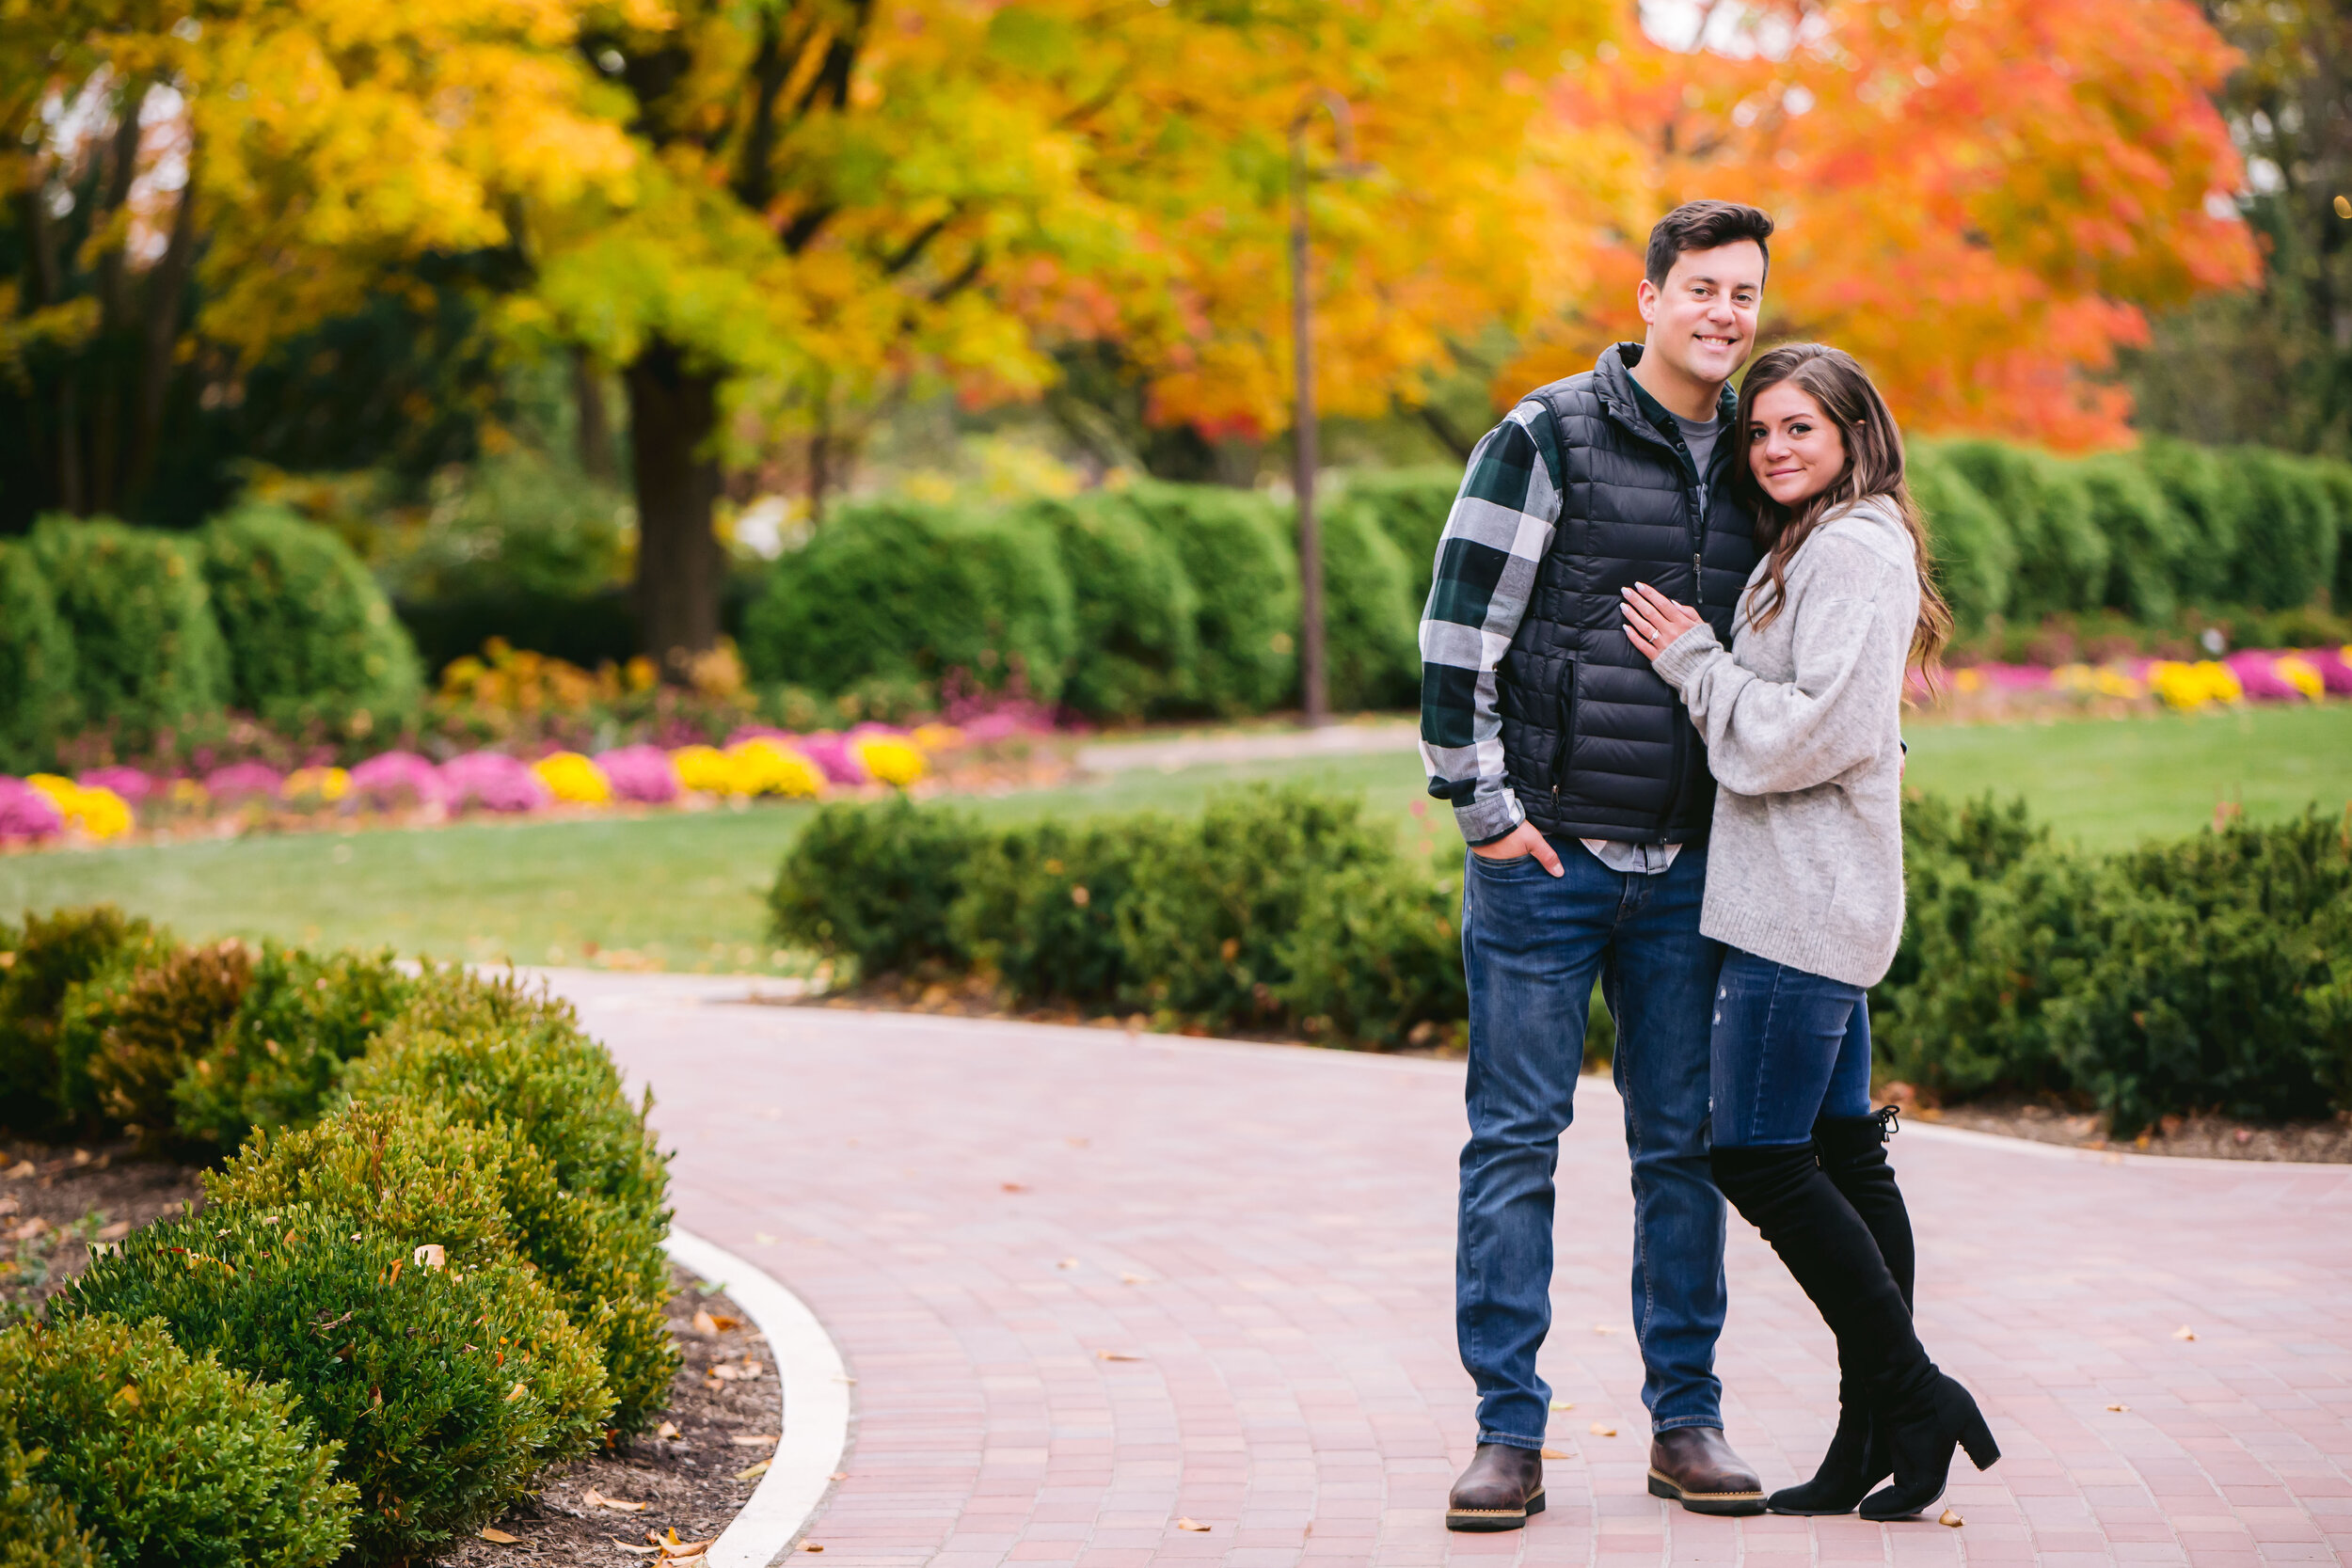 Chicago Best Autumn/ Fall Locations for Engagement Photos/ Photography